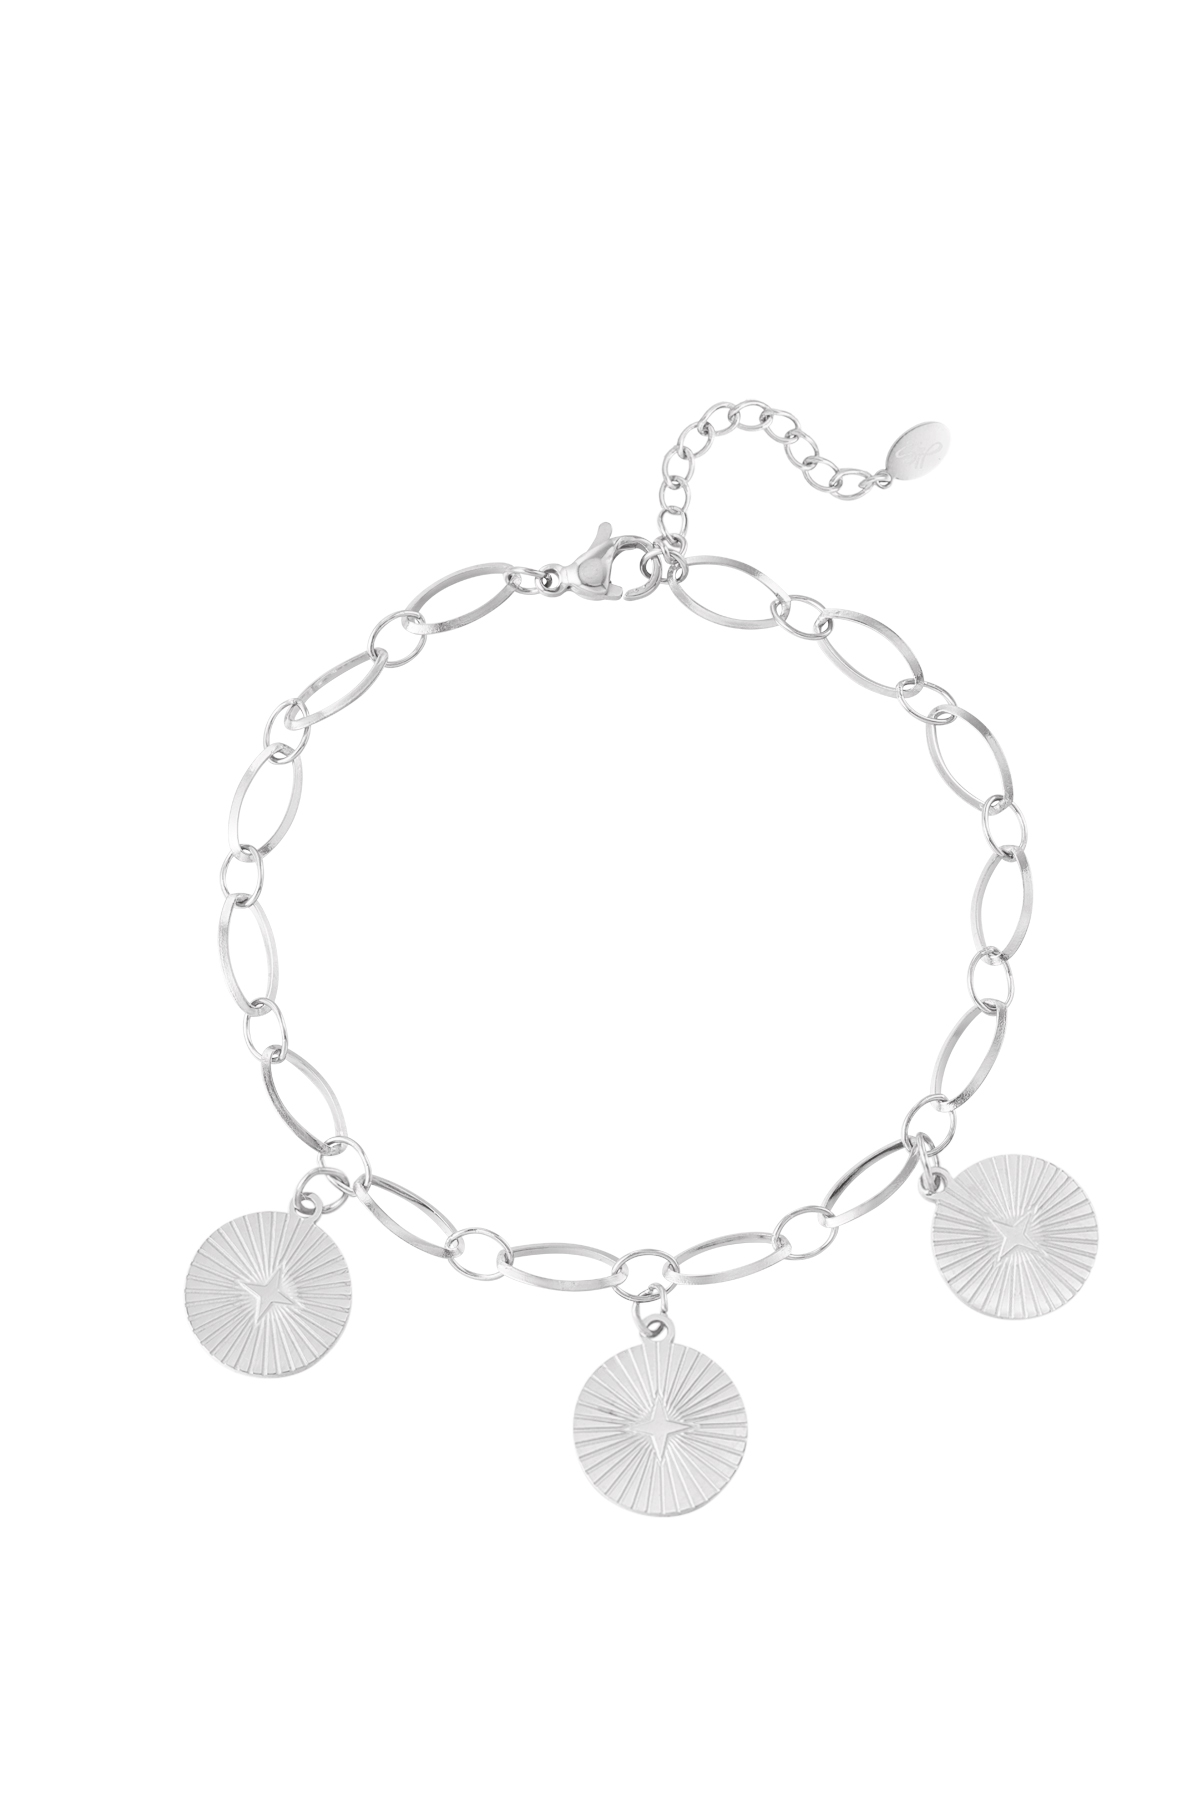 Stainless Steel 3 Coin Chain Bracelets - Silver